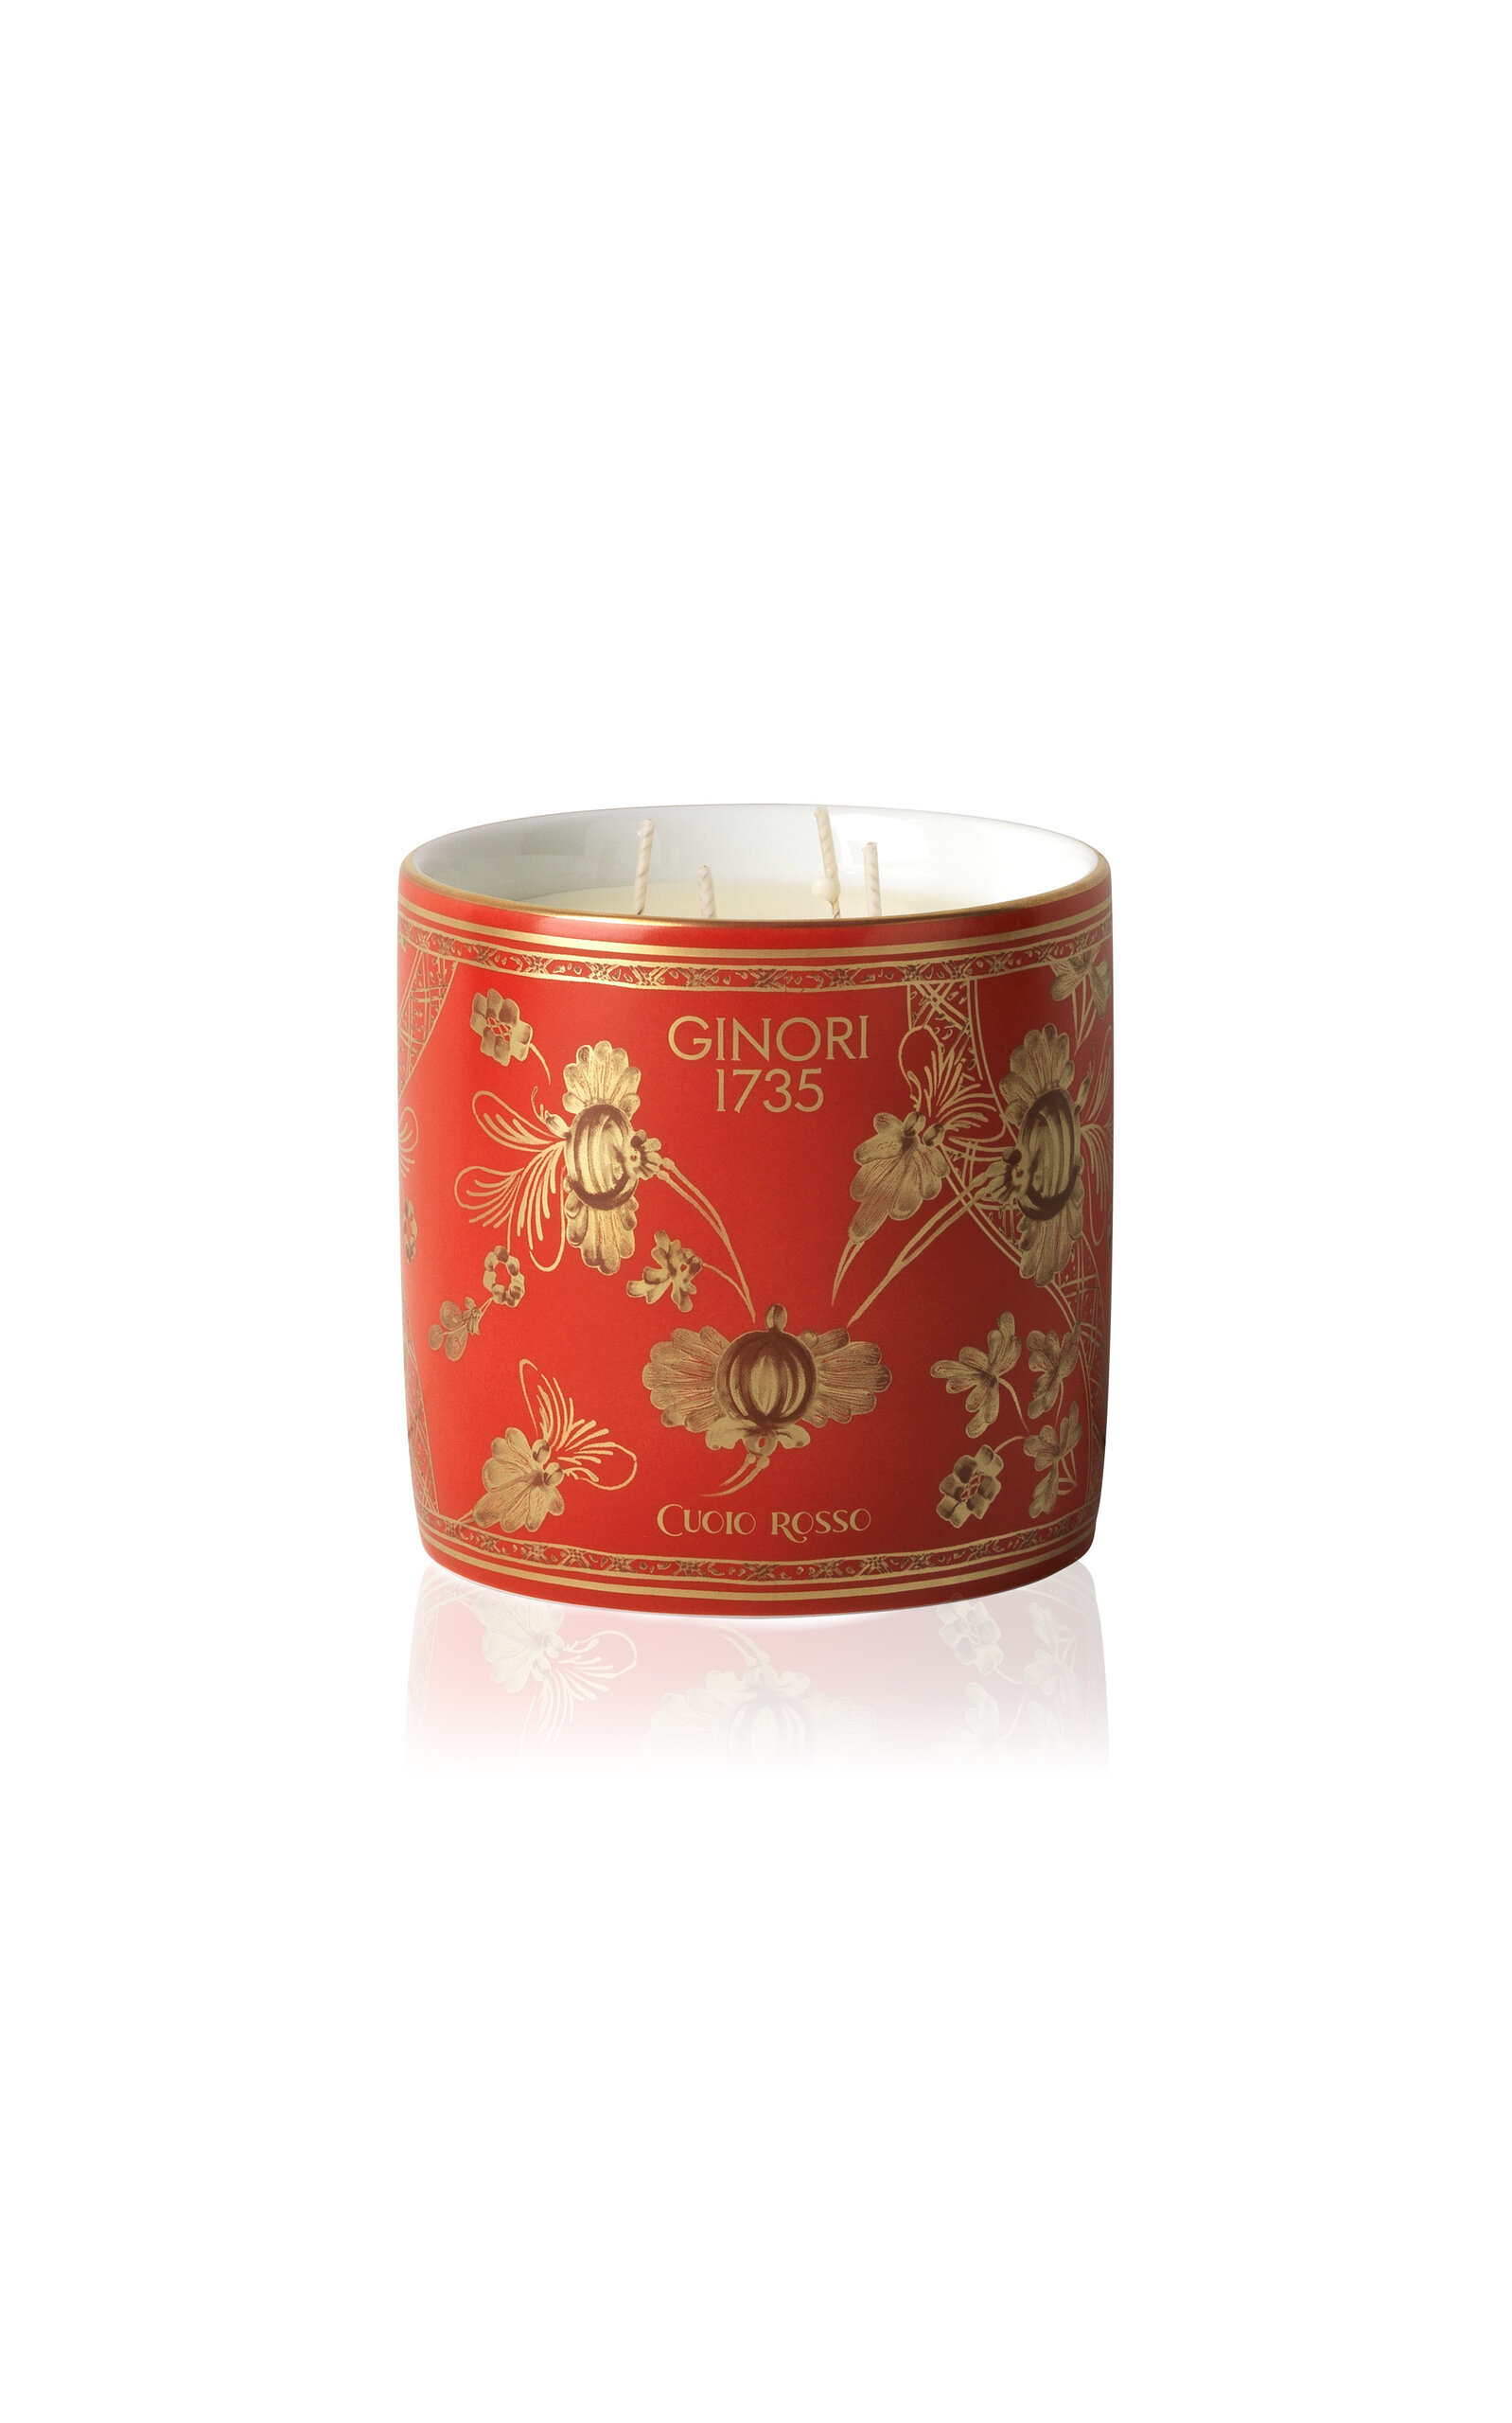 Ginori 1735 Scented Candle In Red